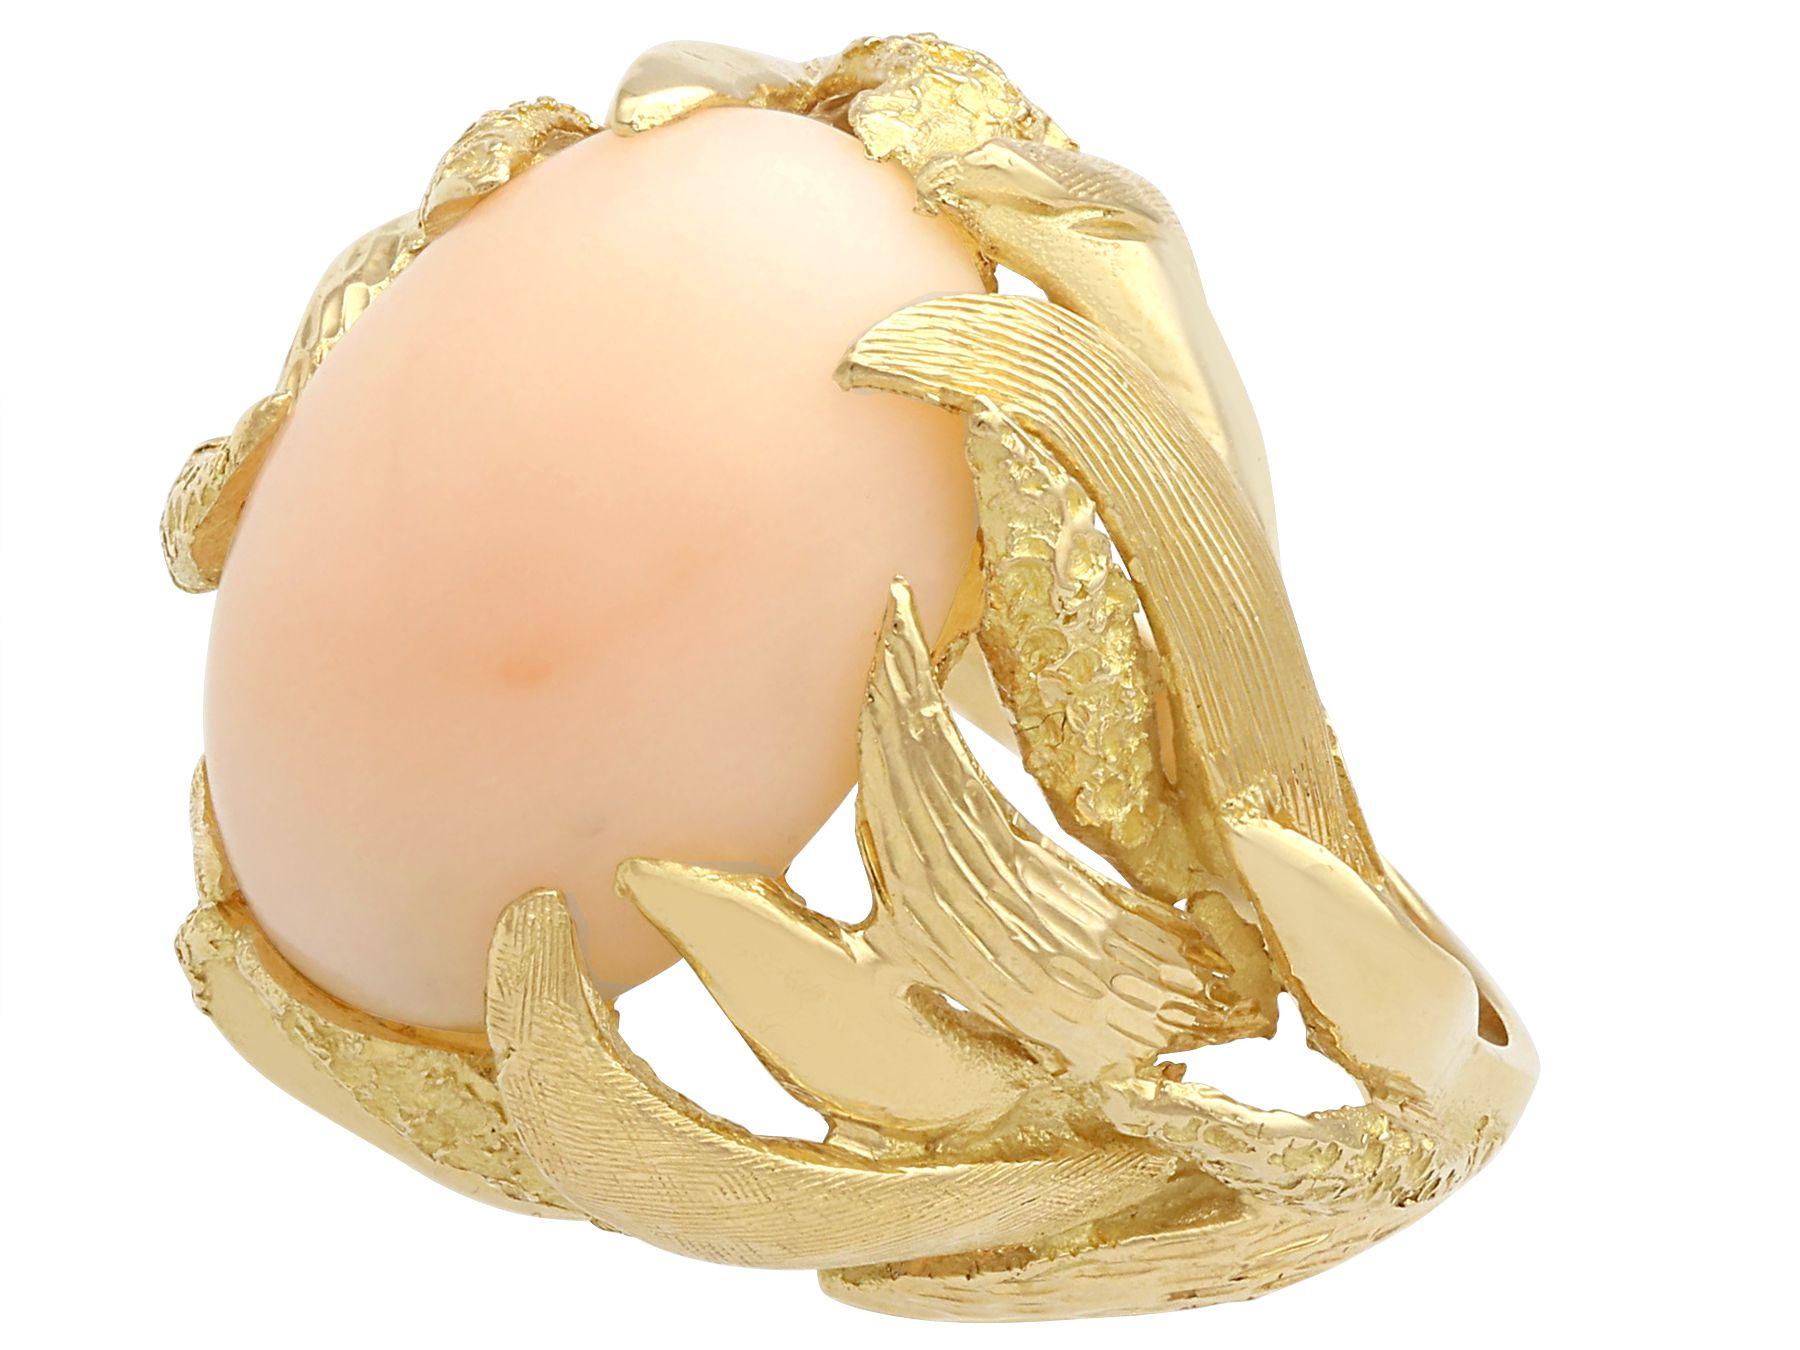 1950s Italian 6.54 Carat Cabochon Cut Coral Yellow Gold Cocktail Ring In Excellent Condition For Sale In Jesmond, Newcastle Upon Tyne